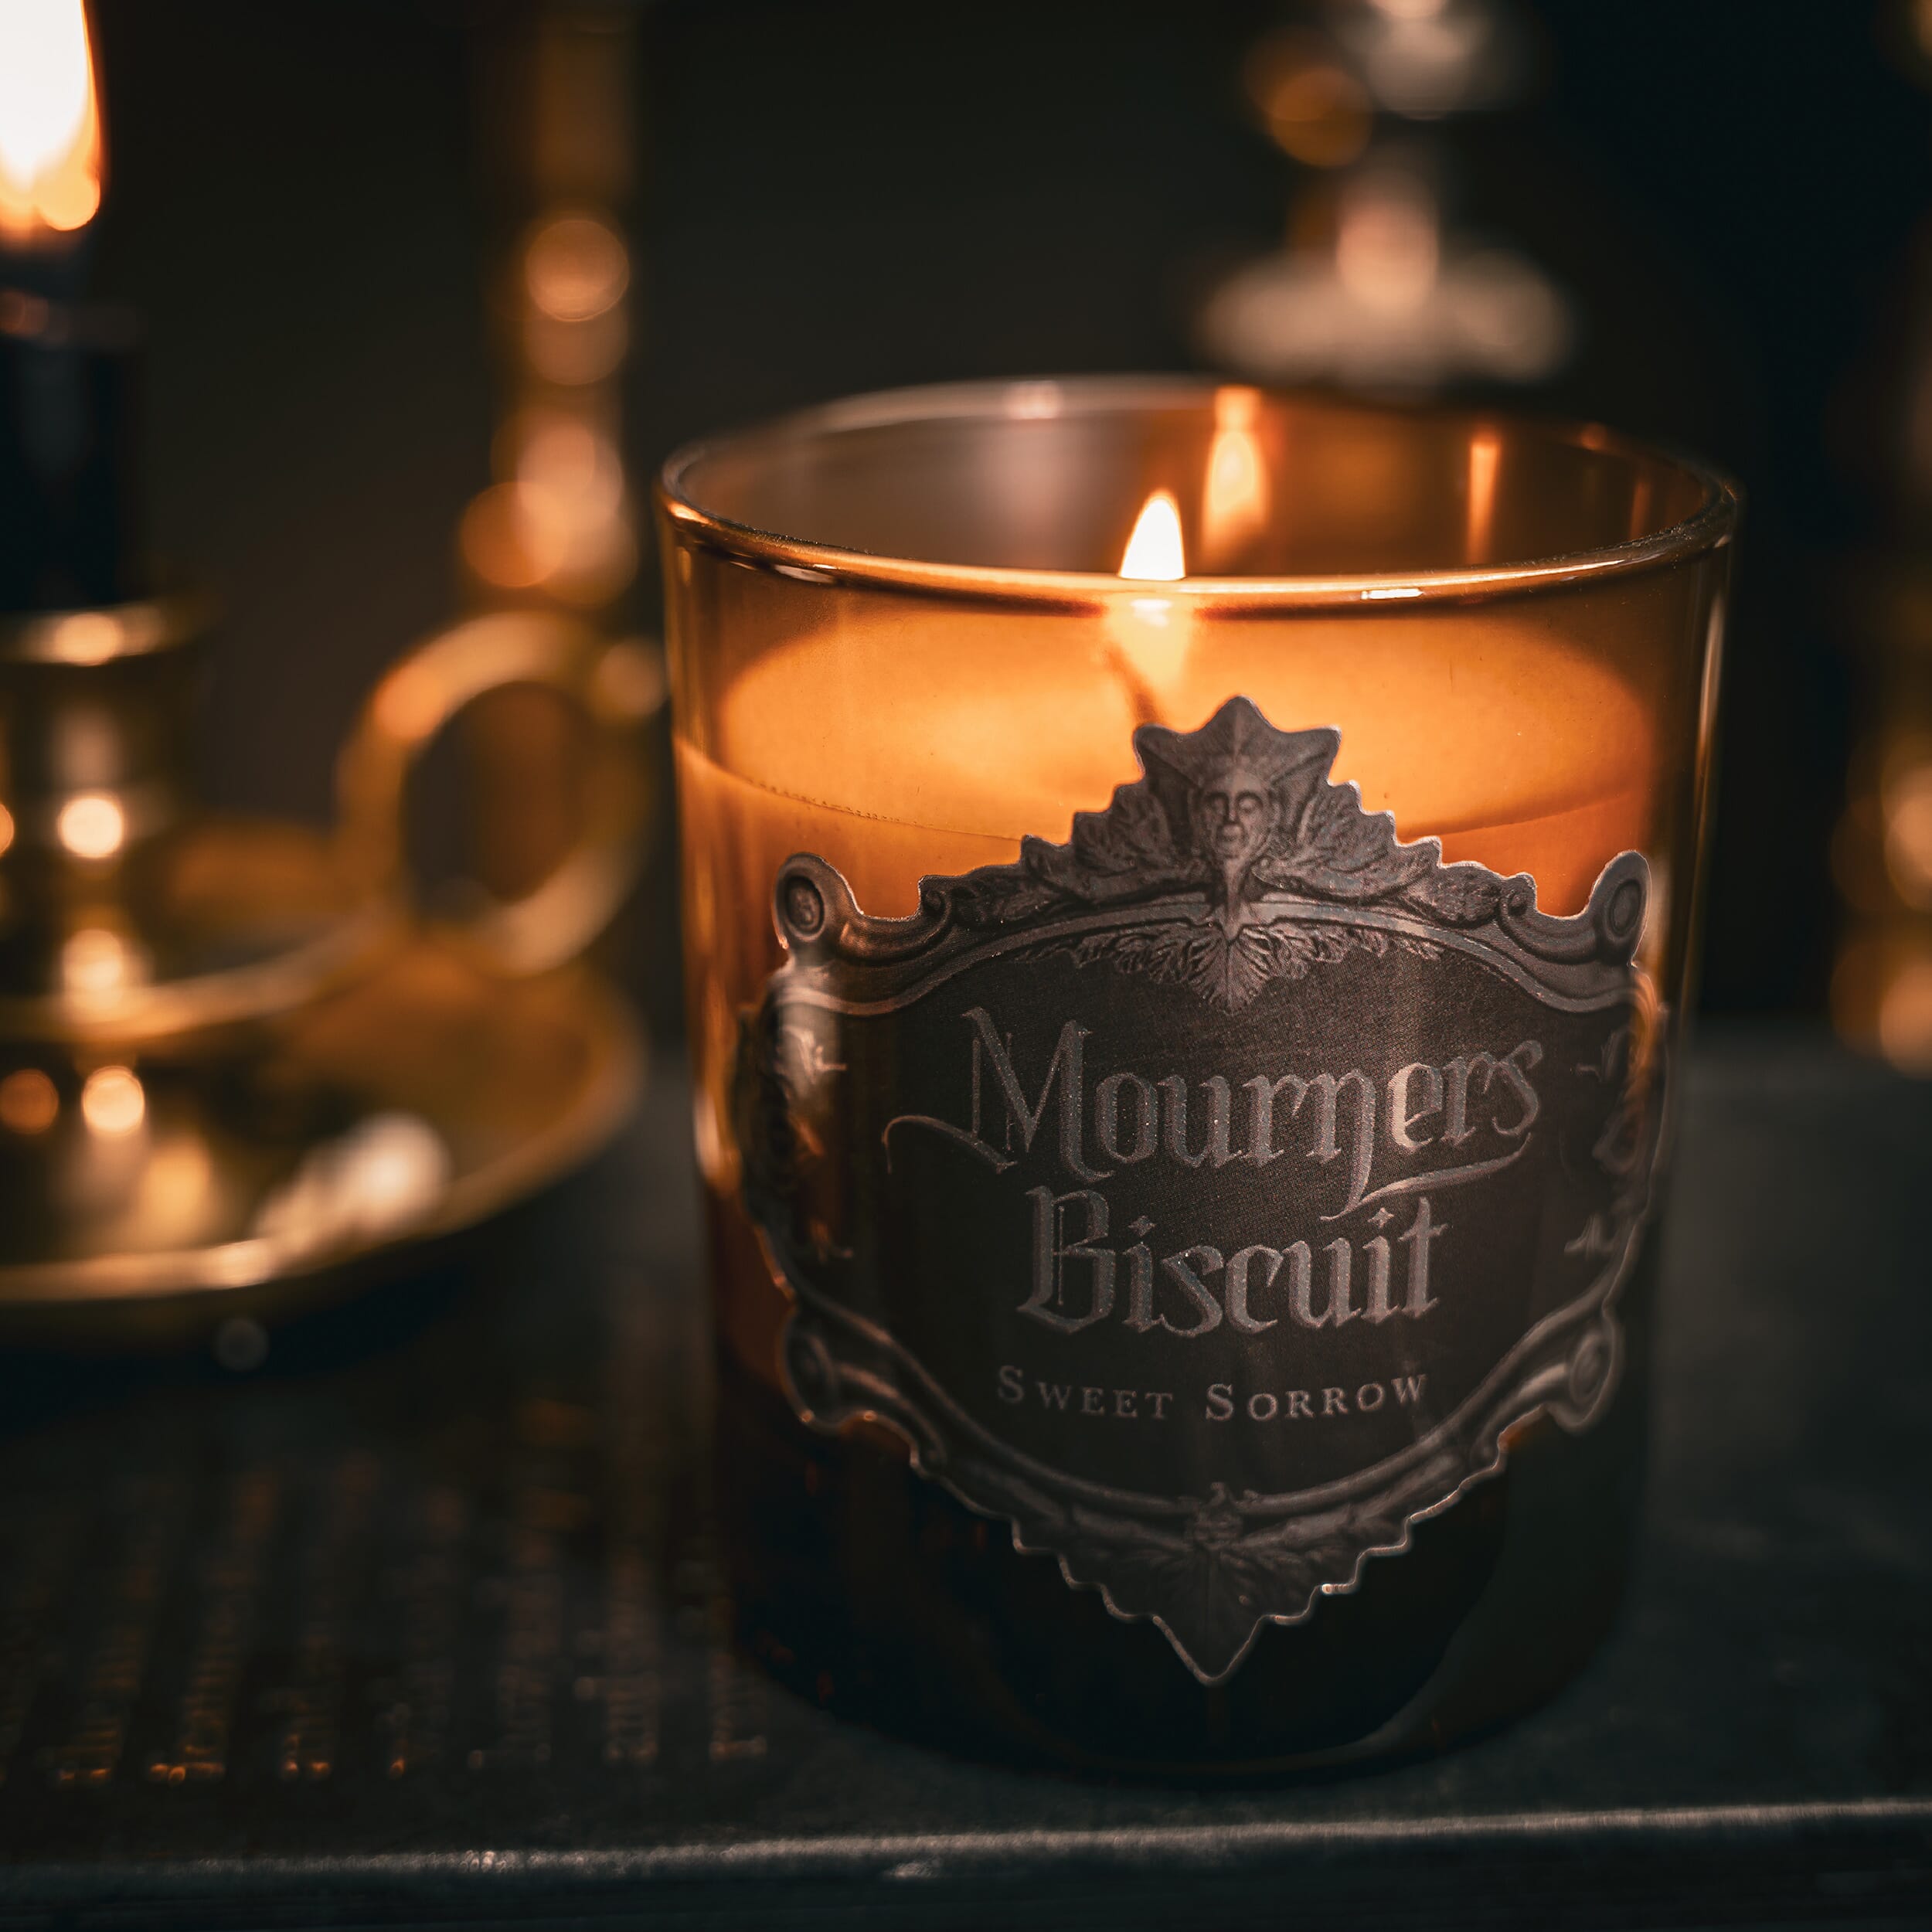 mourners biscuit victorian candle gothic candle the blackened teeth